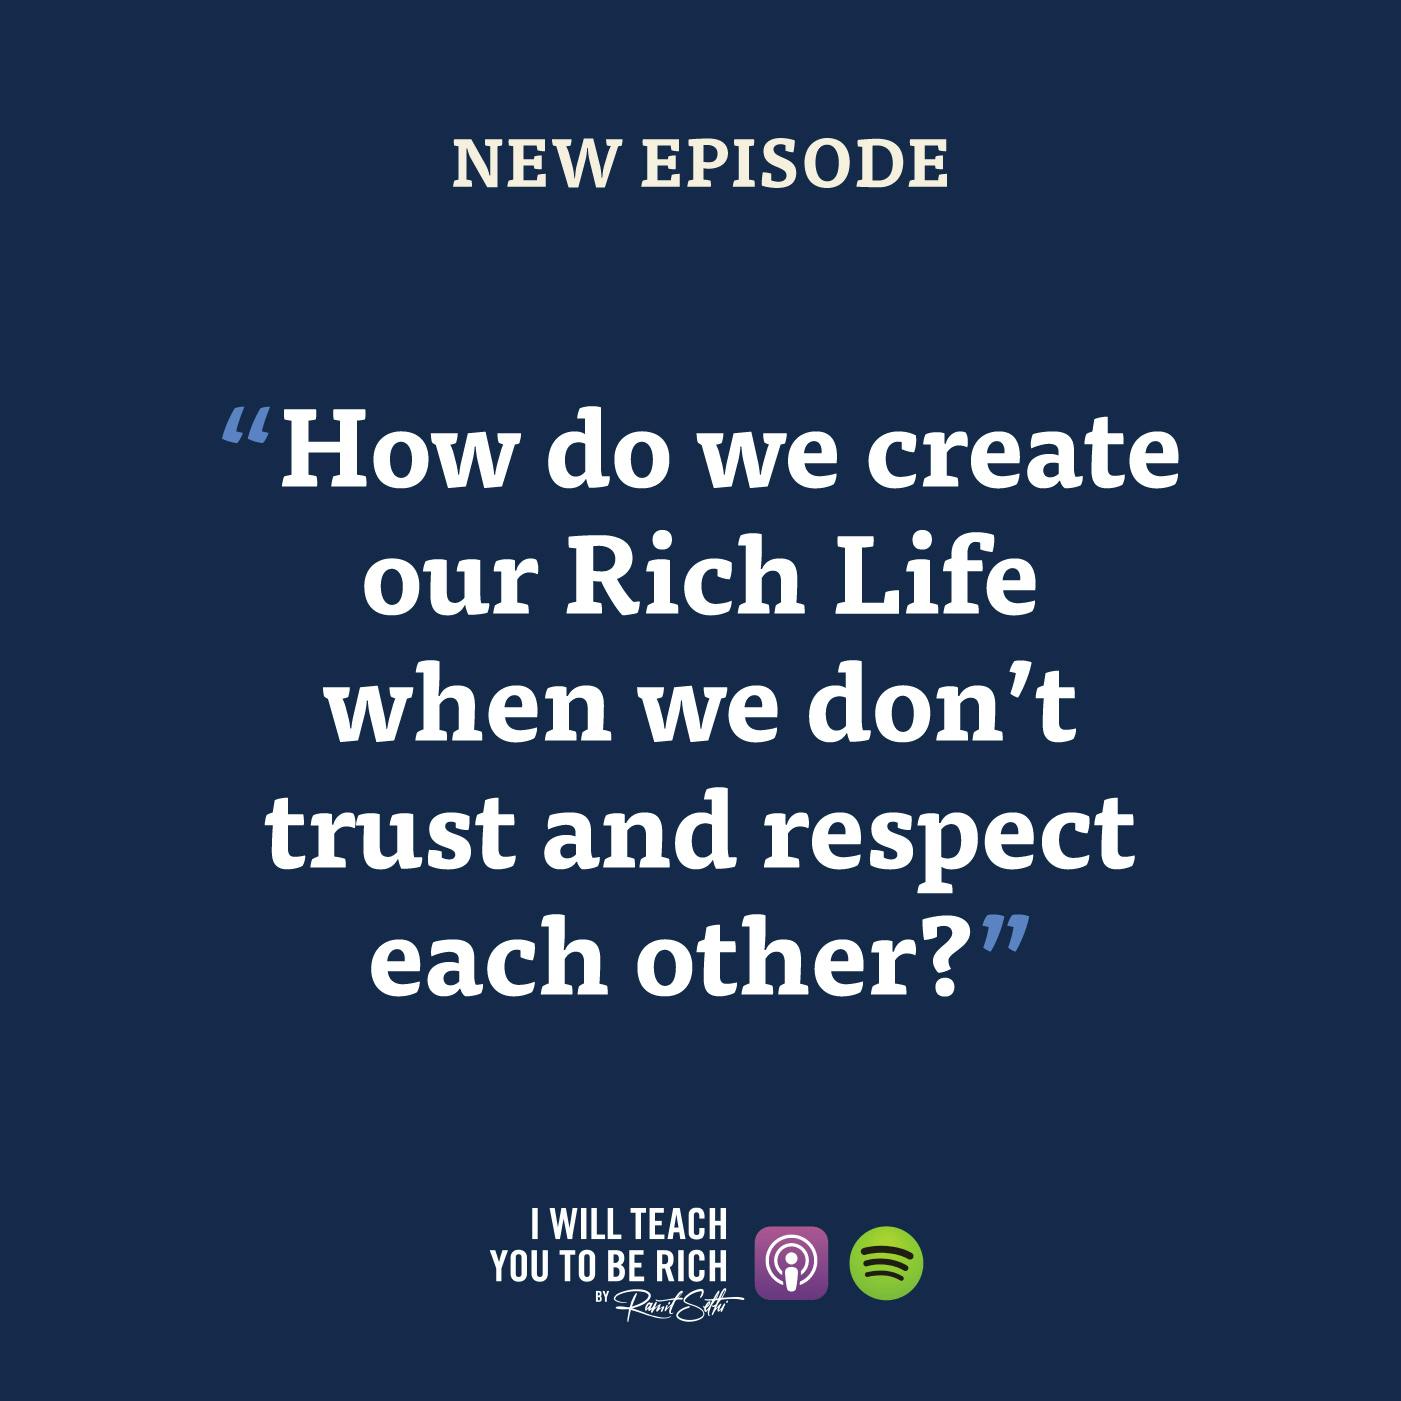 26. “How do we create our Rich Life when we don’t trust and respect each other?”